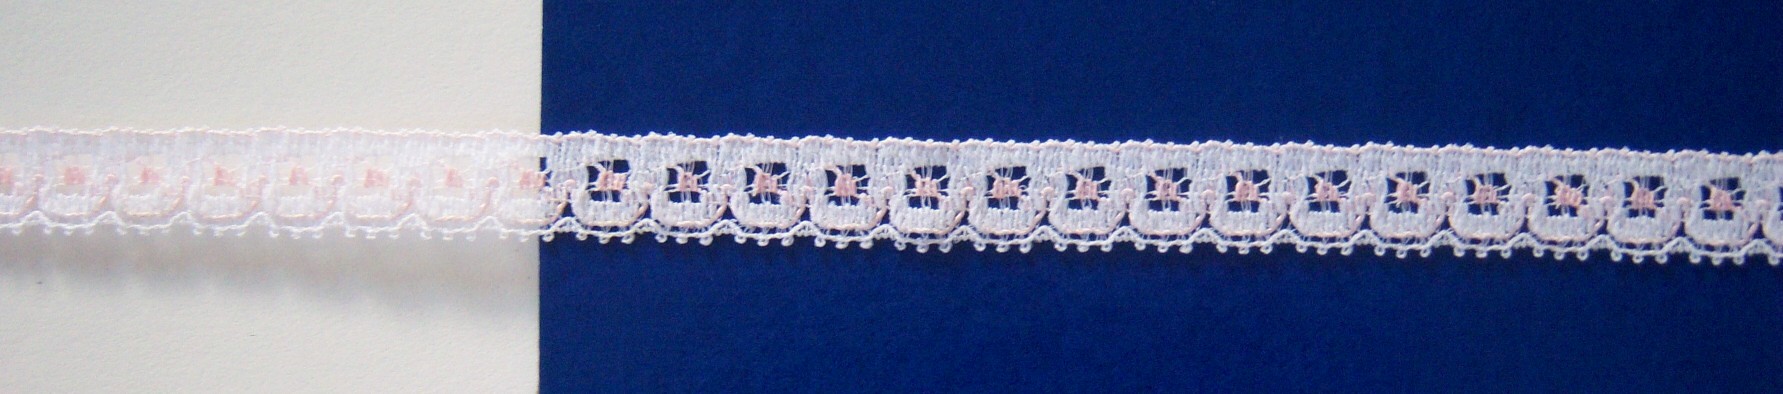 White/Pink 7/16" Stretch Lace